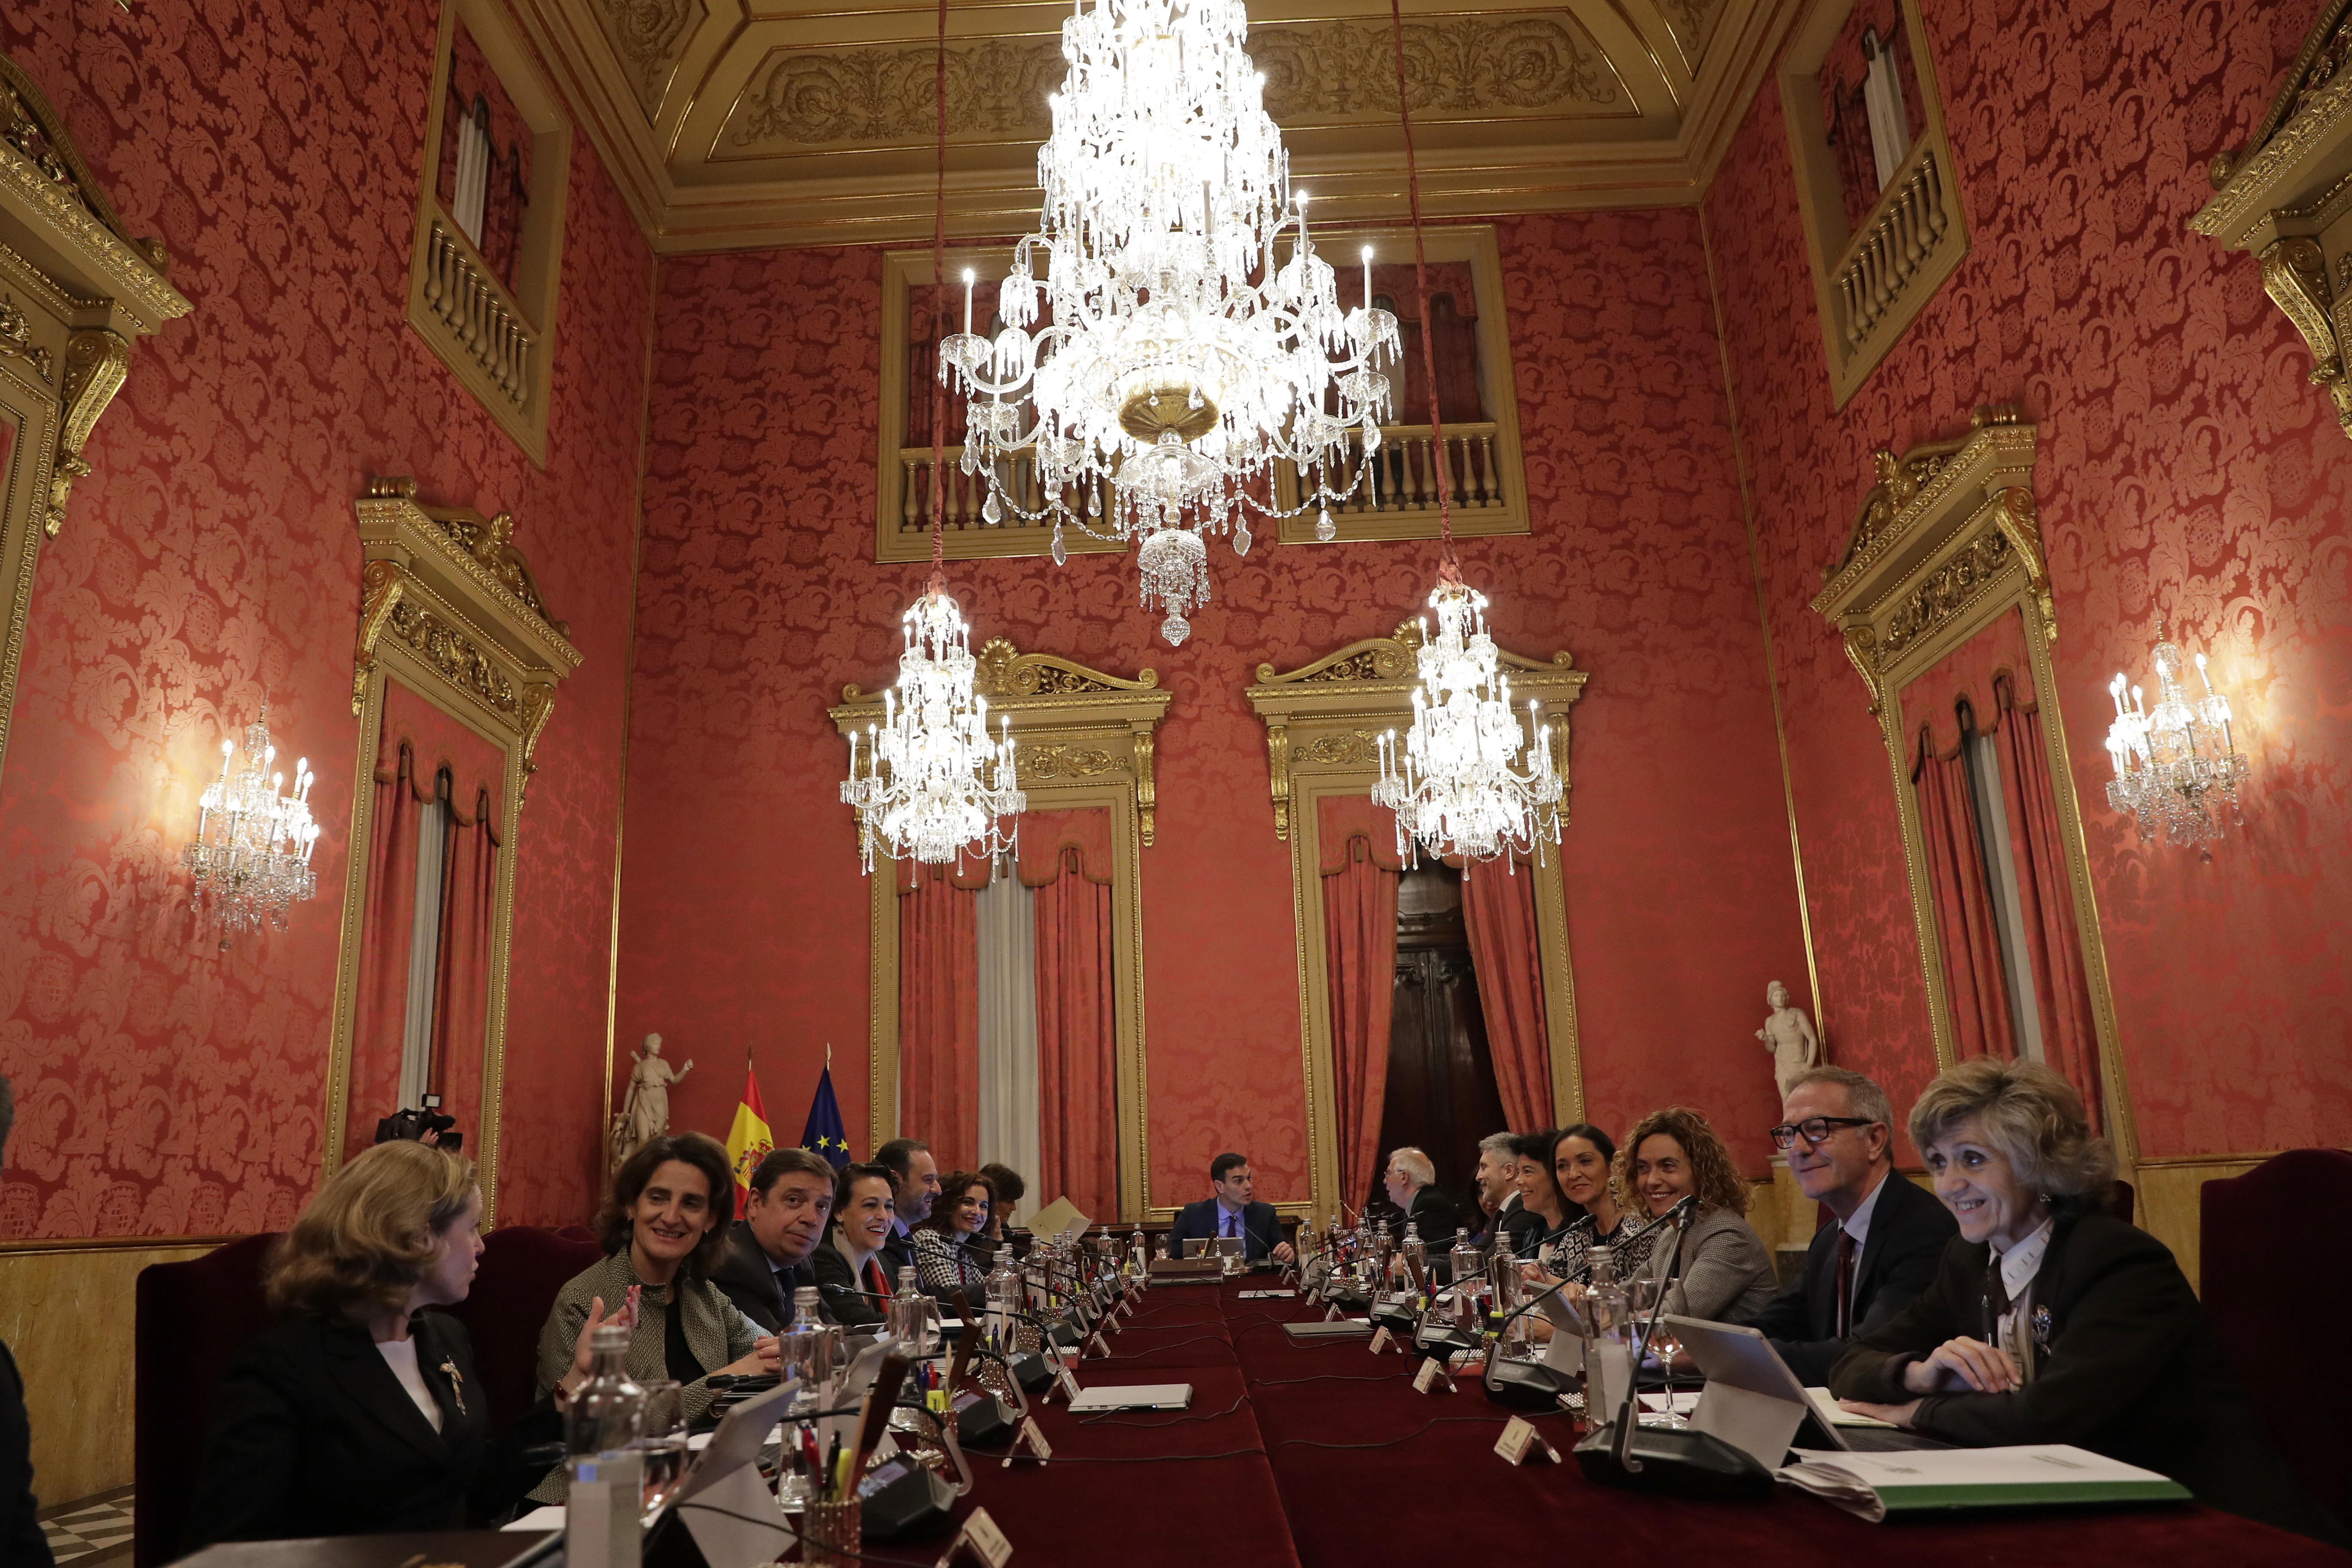 Spain's Prime Minister Pedro Sanchez, centre rear, presides over a weekly Cabinet meeting with government ministers held in Barcelona, Spain, Friday, Dec. 21, 2018. Catalan authorities say pro-independence protesters angry about Spain's Cabinet holding a meeting in Barcelona have blocked a major highway and dozens of roads, disrupting traffic to and from the city. (AP Photo/Manu Fernandez)